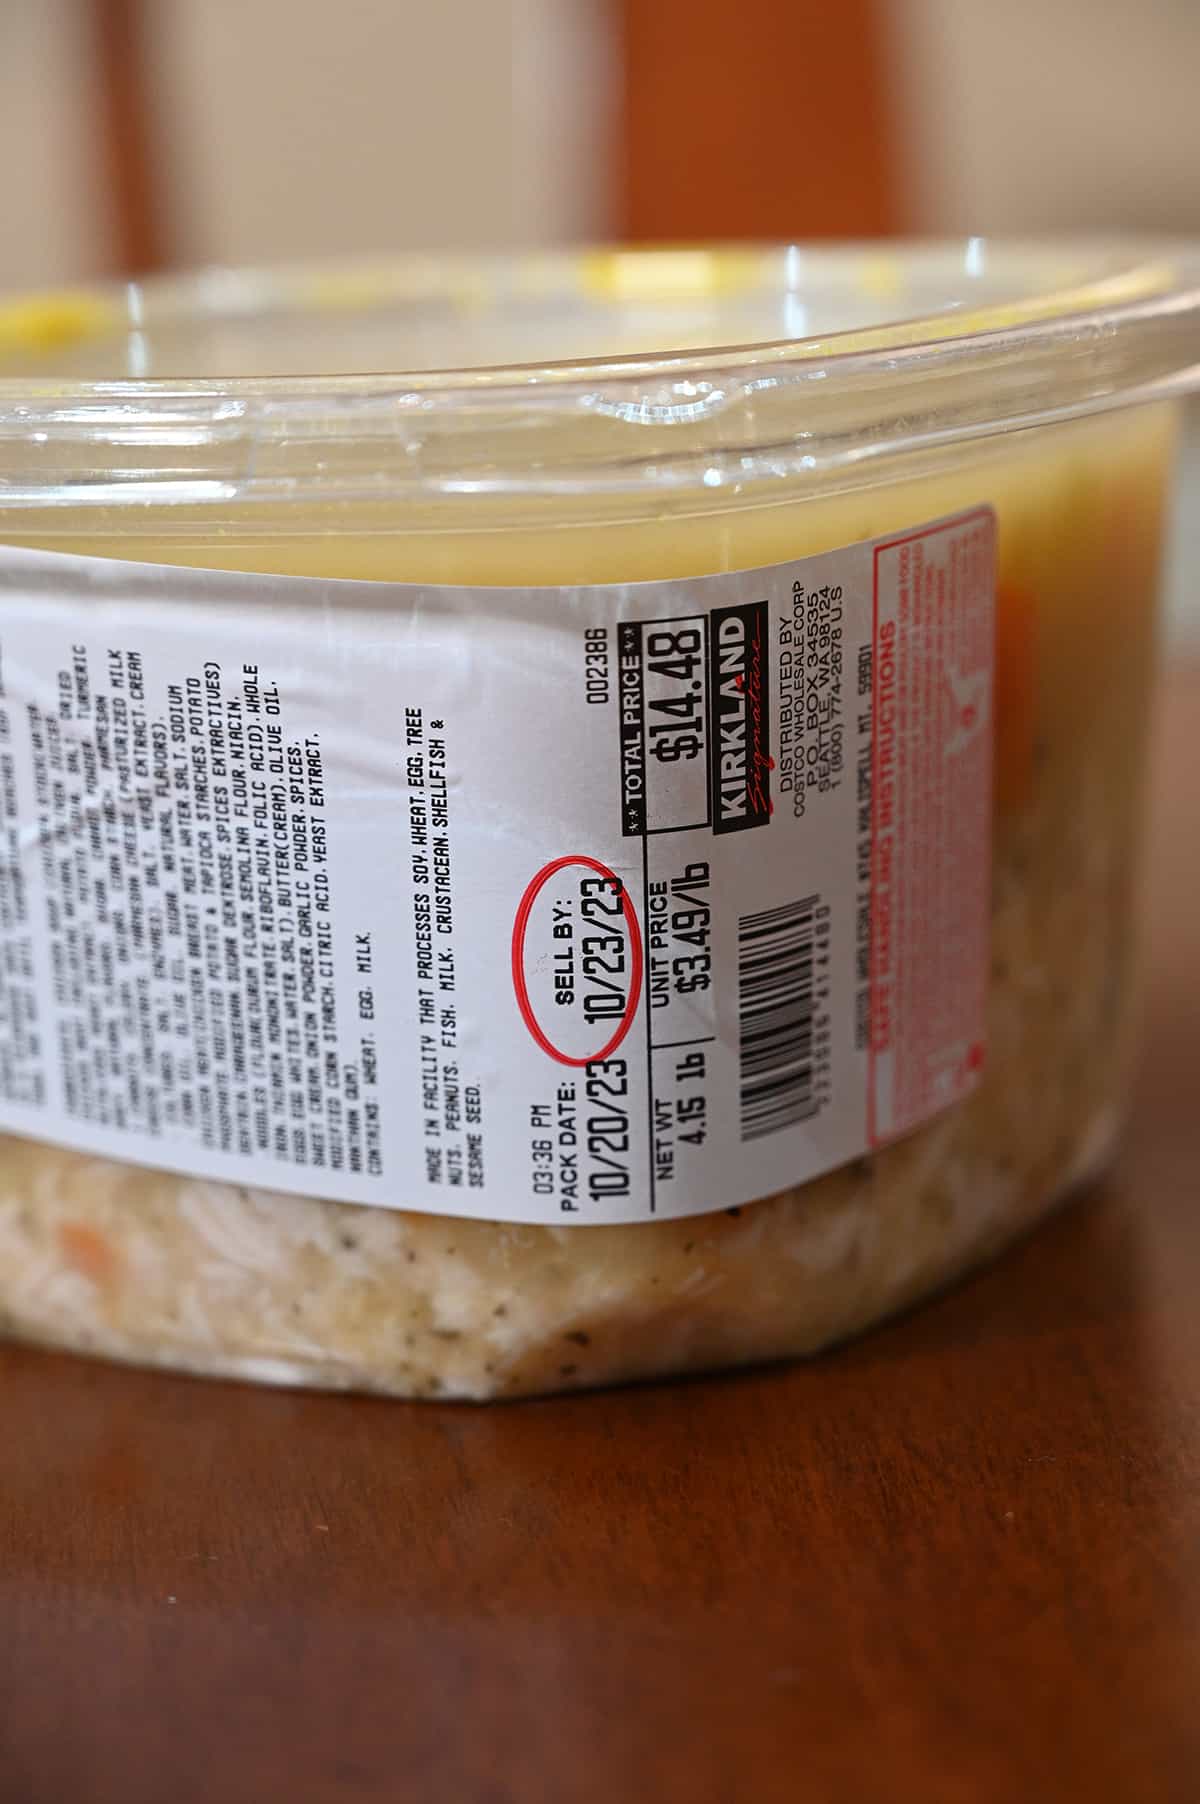 Closeup side view image of the container of chicken noodle soup showing ingredients, cost and best before date.